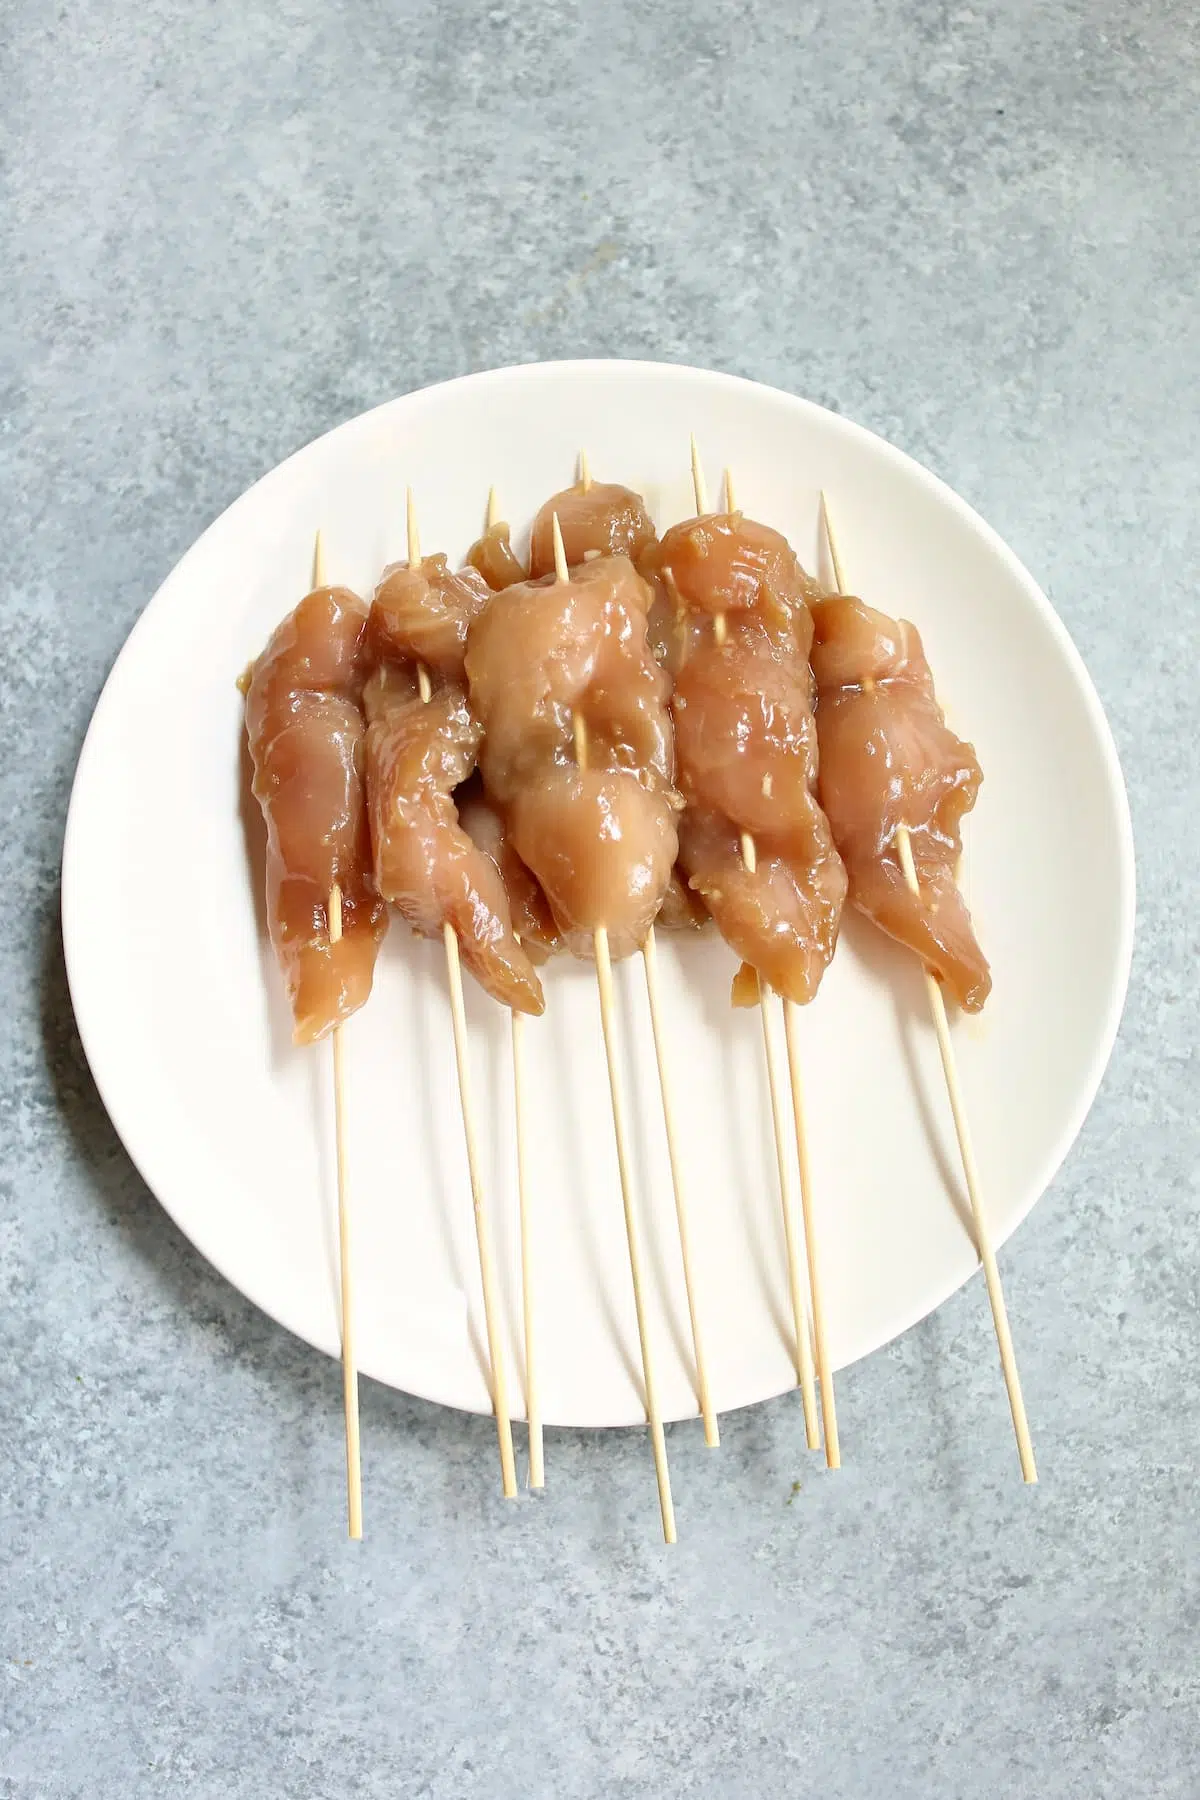 a white plate with uncooked chicken skewers on it.